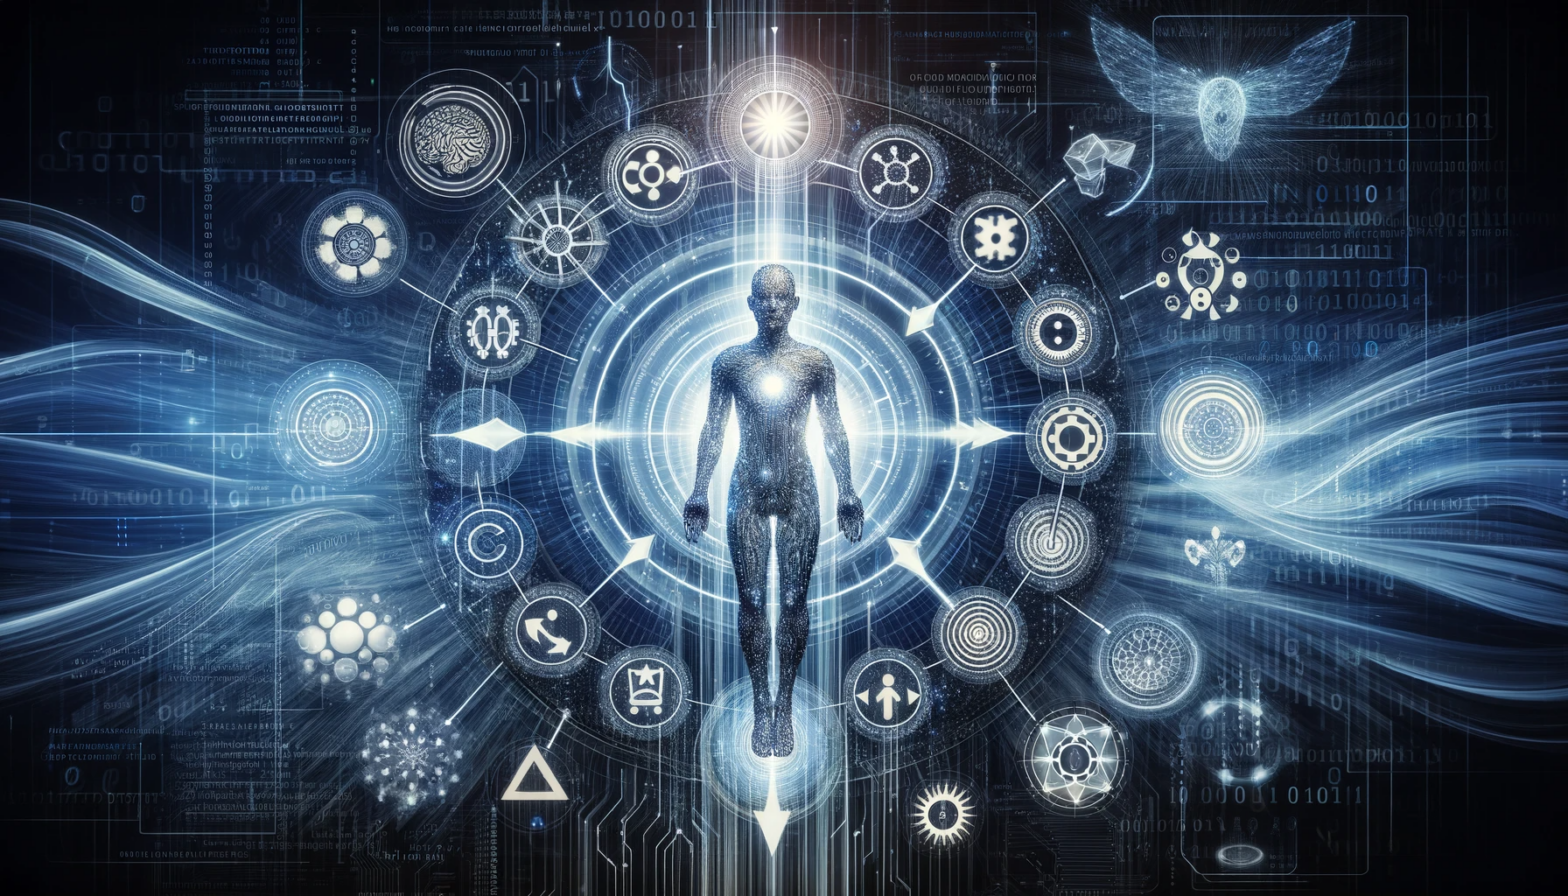 An image generated by DALL-E to methophirically represent the blending of the concepts of agile software development and artificial intelligence. Shows a humanoid figure made of code, surrounded by circuitry, and symbols evoking agile and devops processes